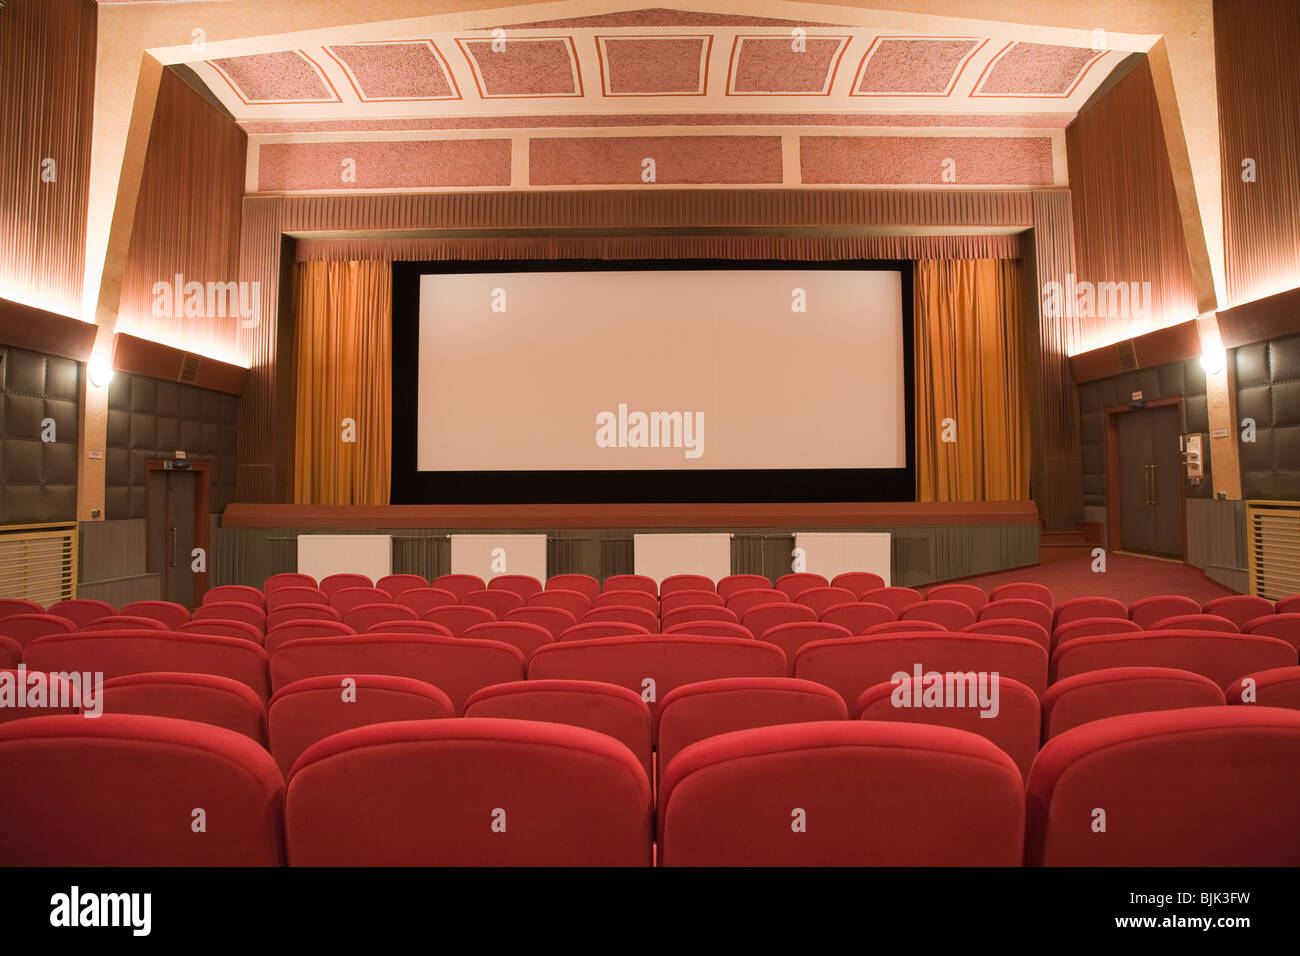 Empty retro cinema auditorium in cubism style with line of chairs and projection screen. Ready for adding your own picture. Stock Photo